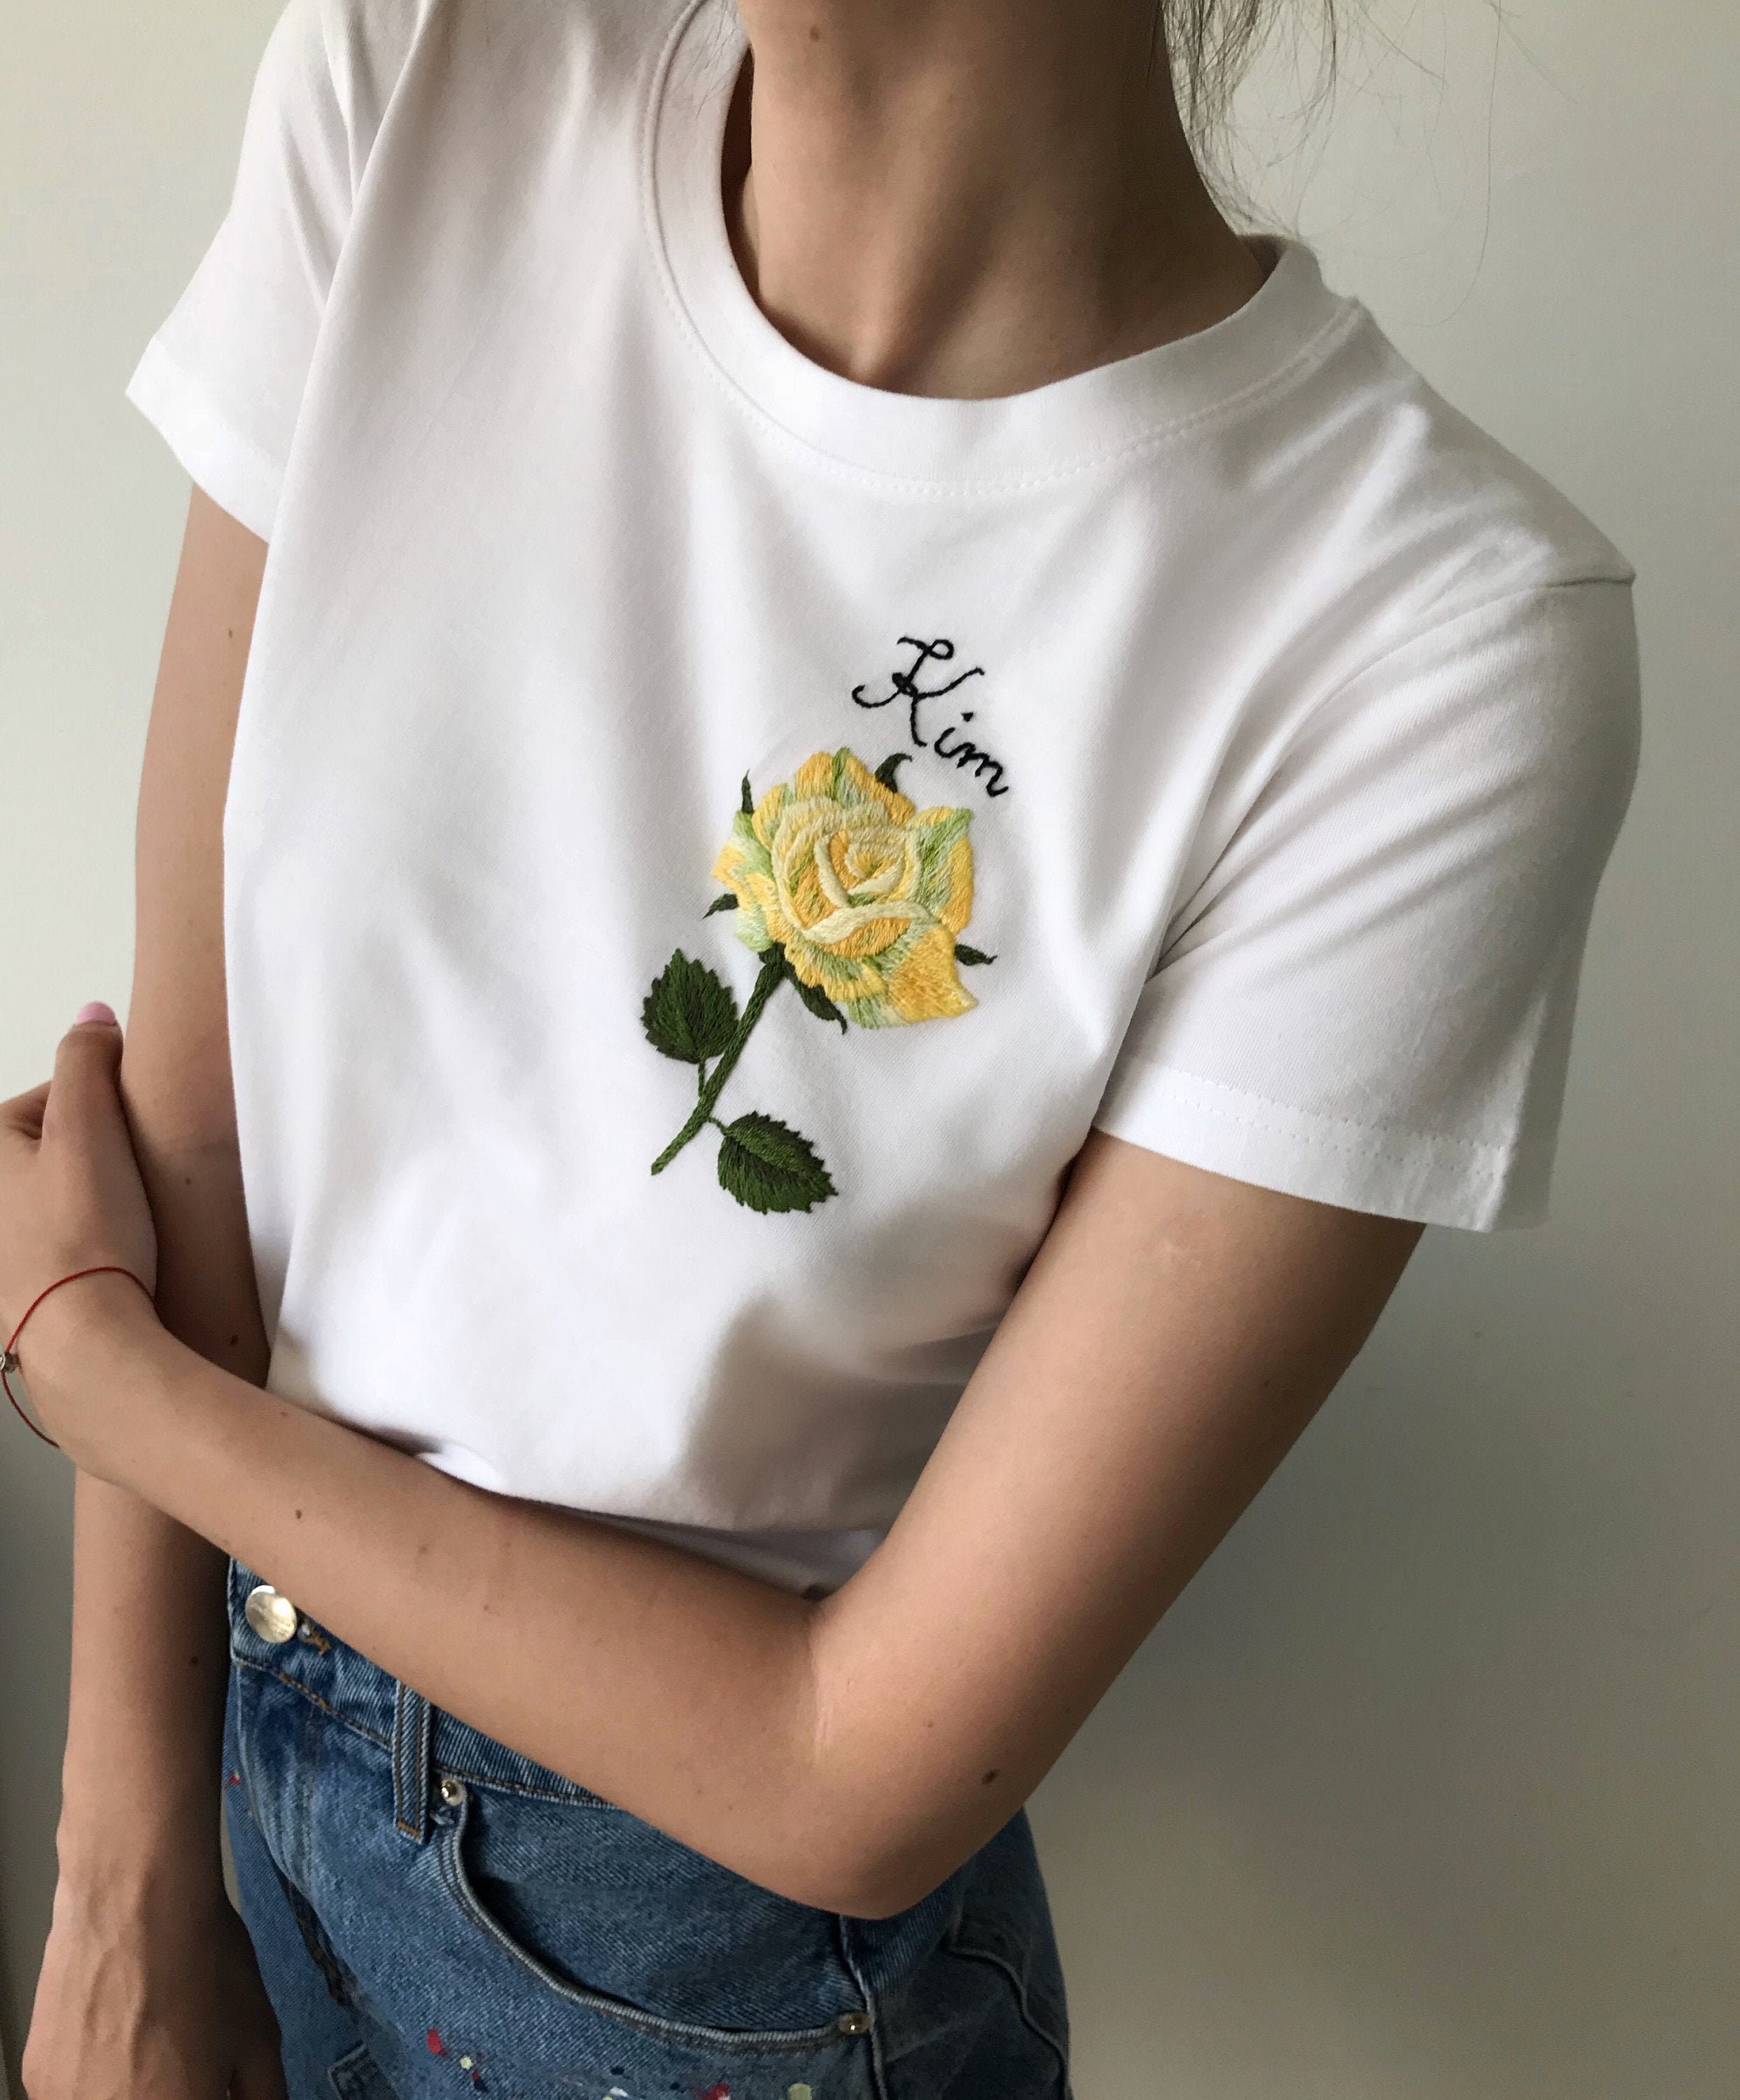 Rose Hand Embroidered T-shirt, Unusual Floral Embroidery Shirt, Custom  Embroidery Tee, Personalized Gift, Self Gifts, Mom Gifts Under 50 -   Finland